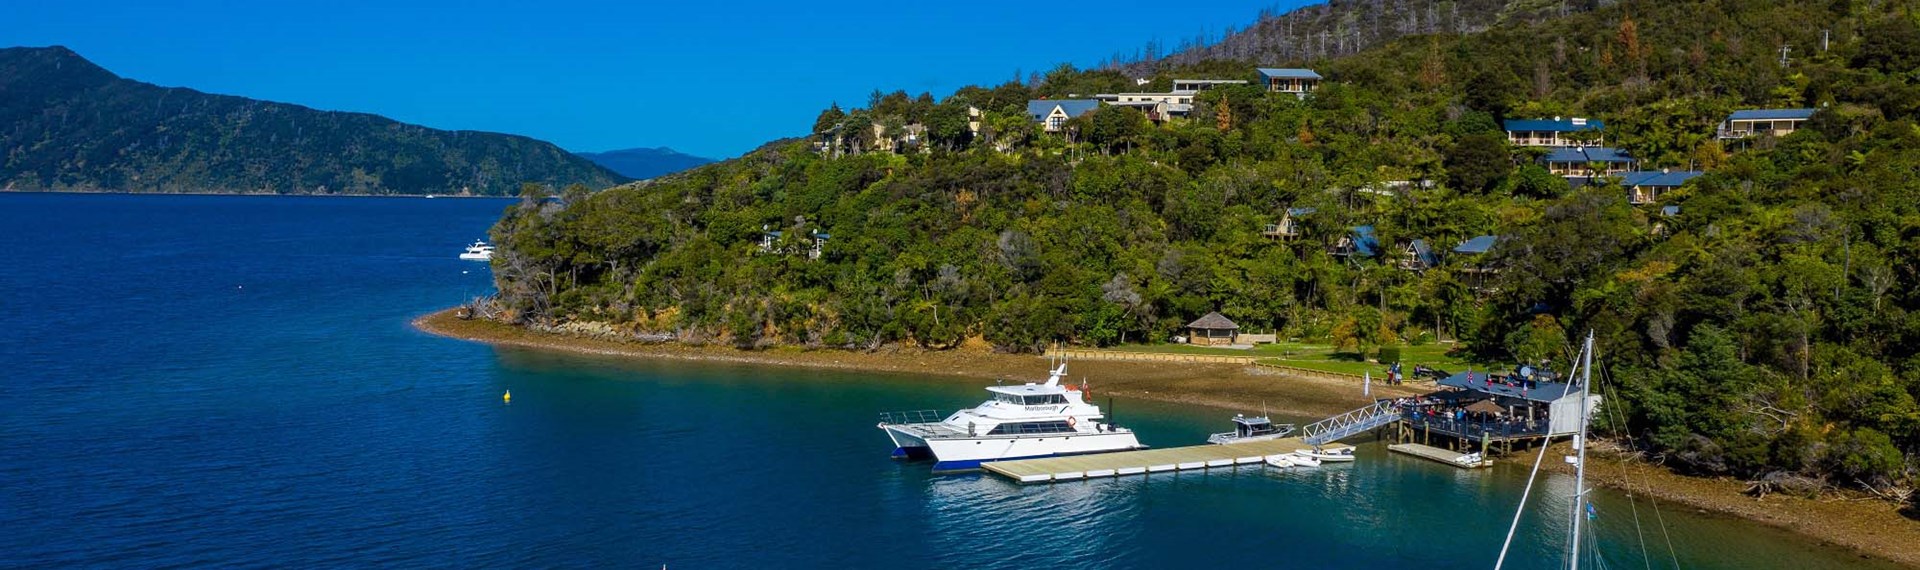 Large commercial vessels like MV Odyssea can park easily at the Punga Cove jetty which is located at the bottom of the accommodation propertyin the Marlborough Sounds in New Zealand's top of the South Island